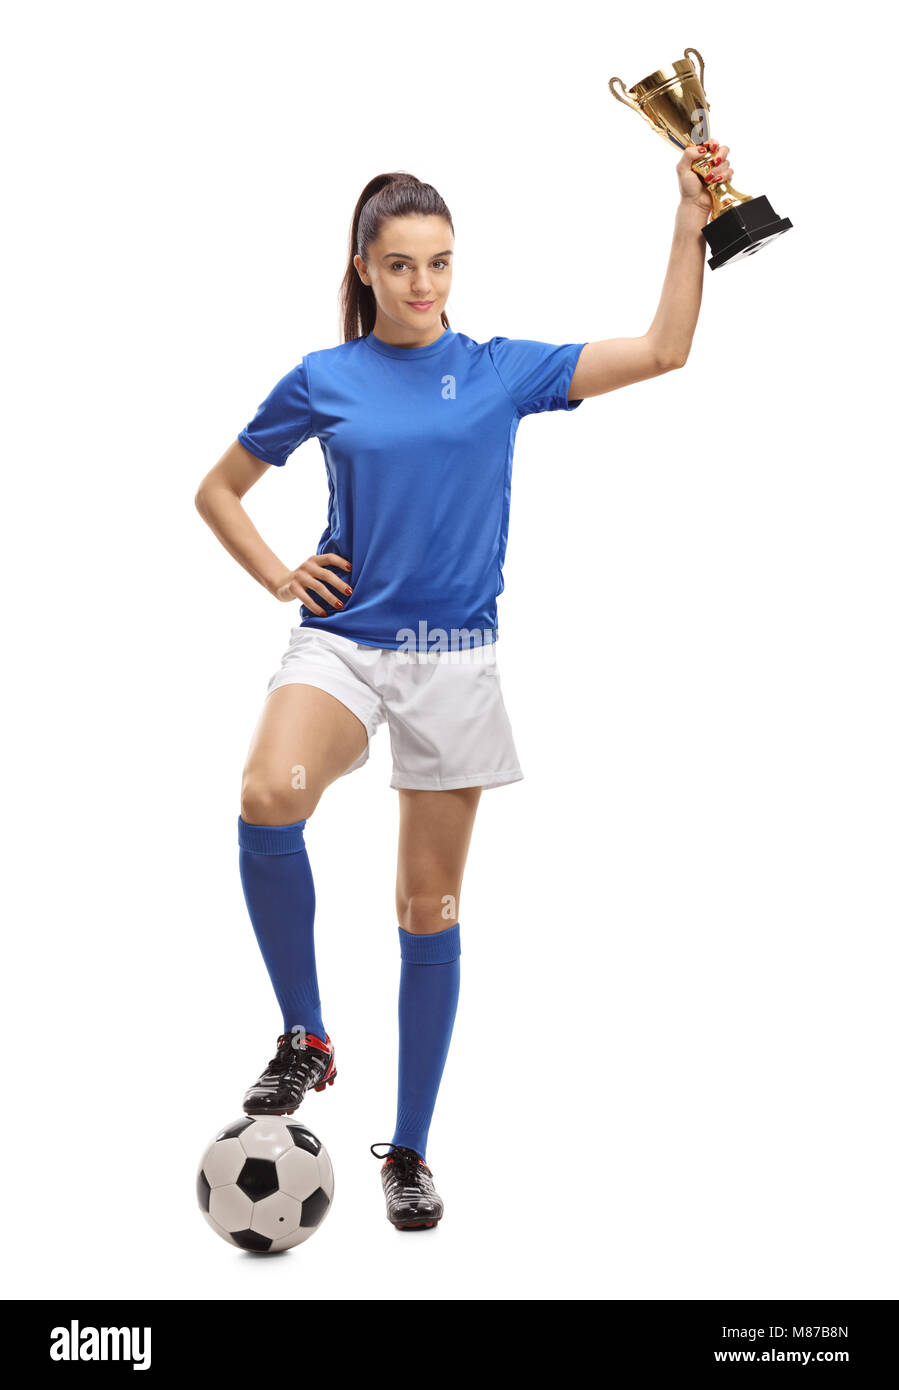 Full length portrait of a female soccer player with a football and a golden trophy isolated on white background Stock Photo